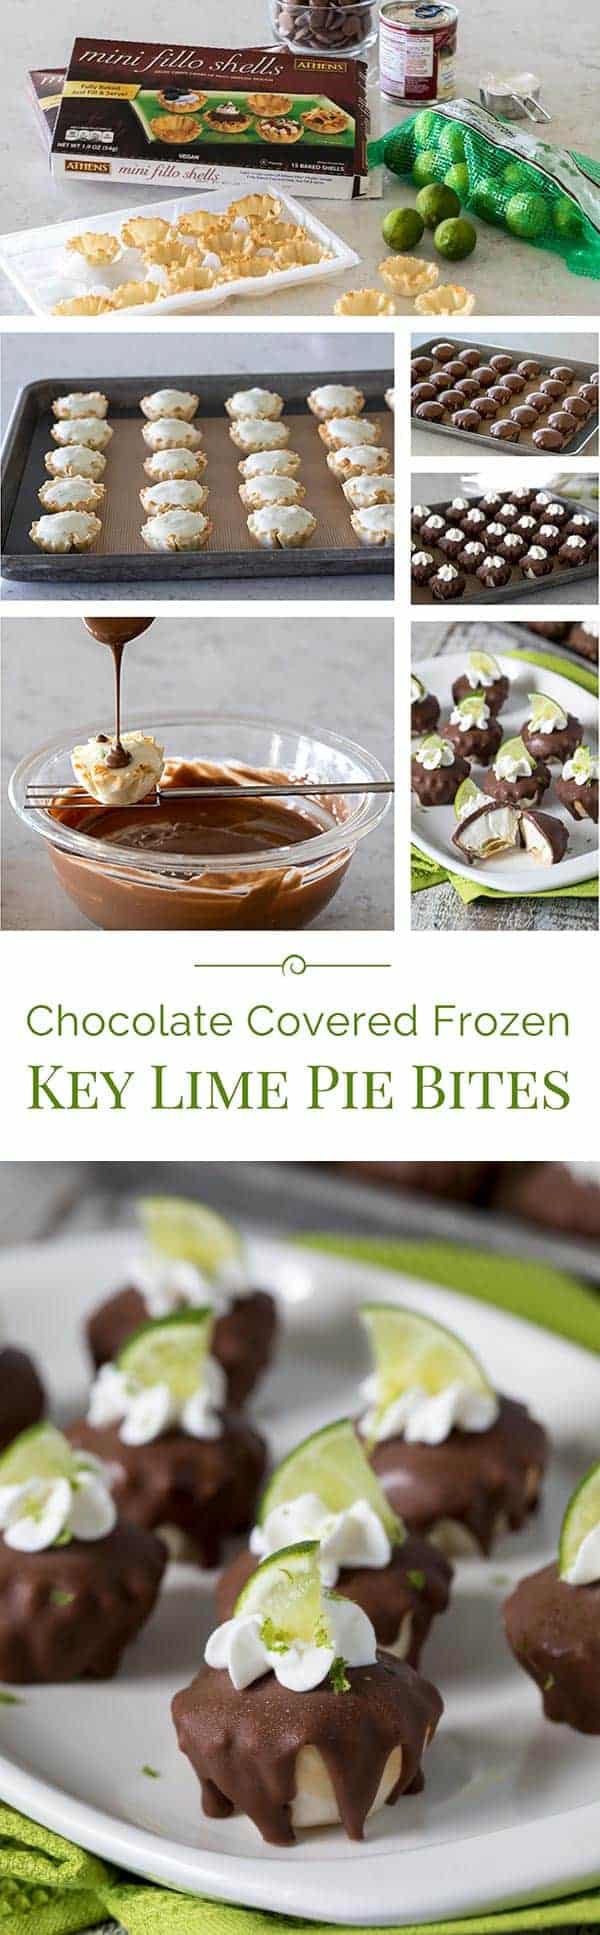 Chocolate-Covered-Key-Lime-Pie-Bites-Pinterest-Collage